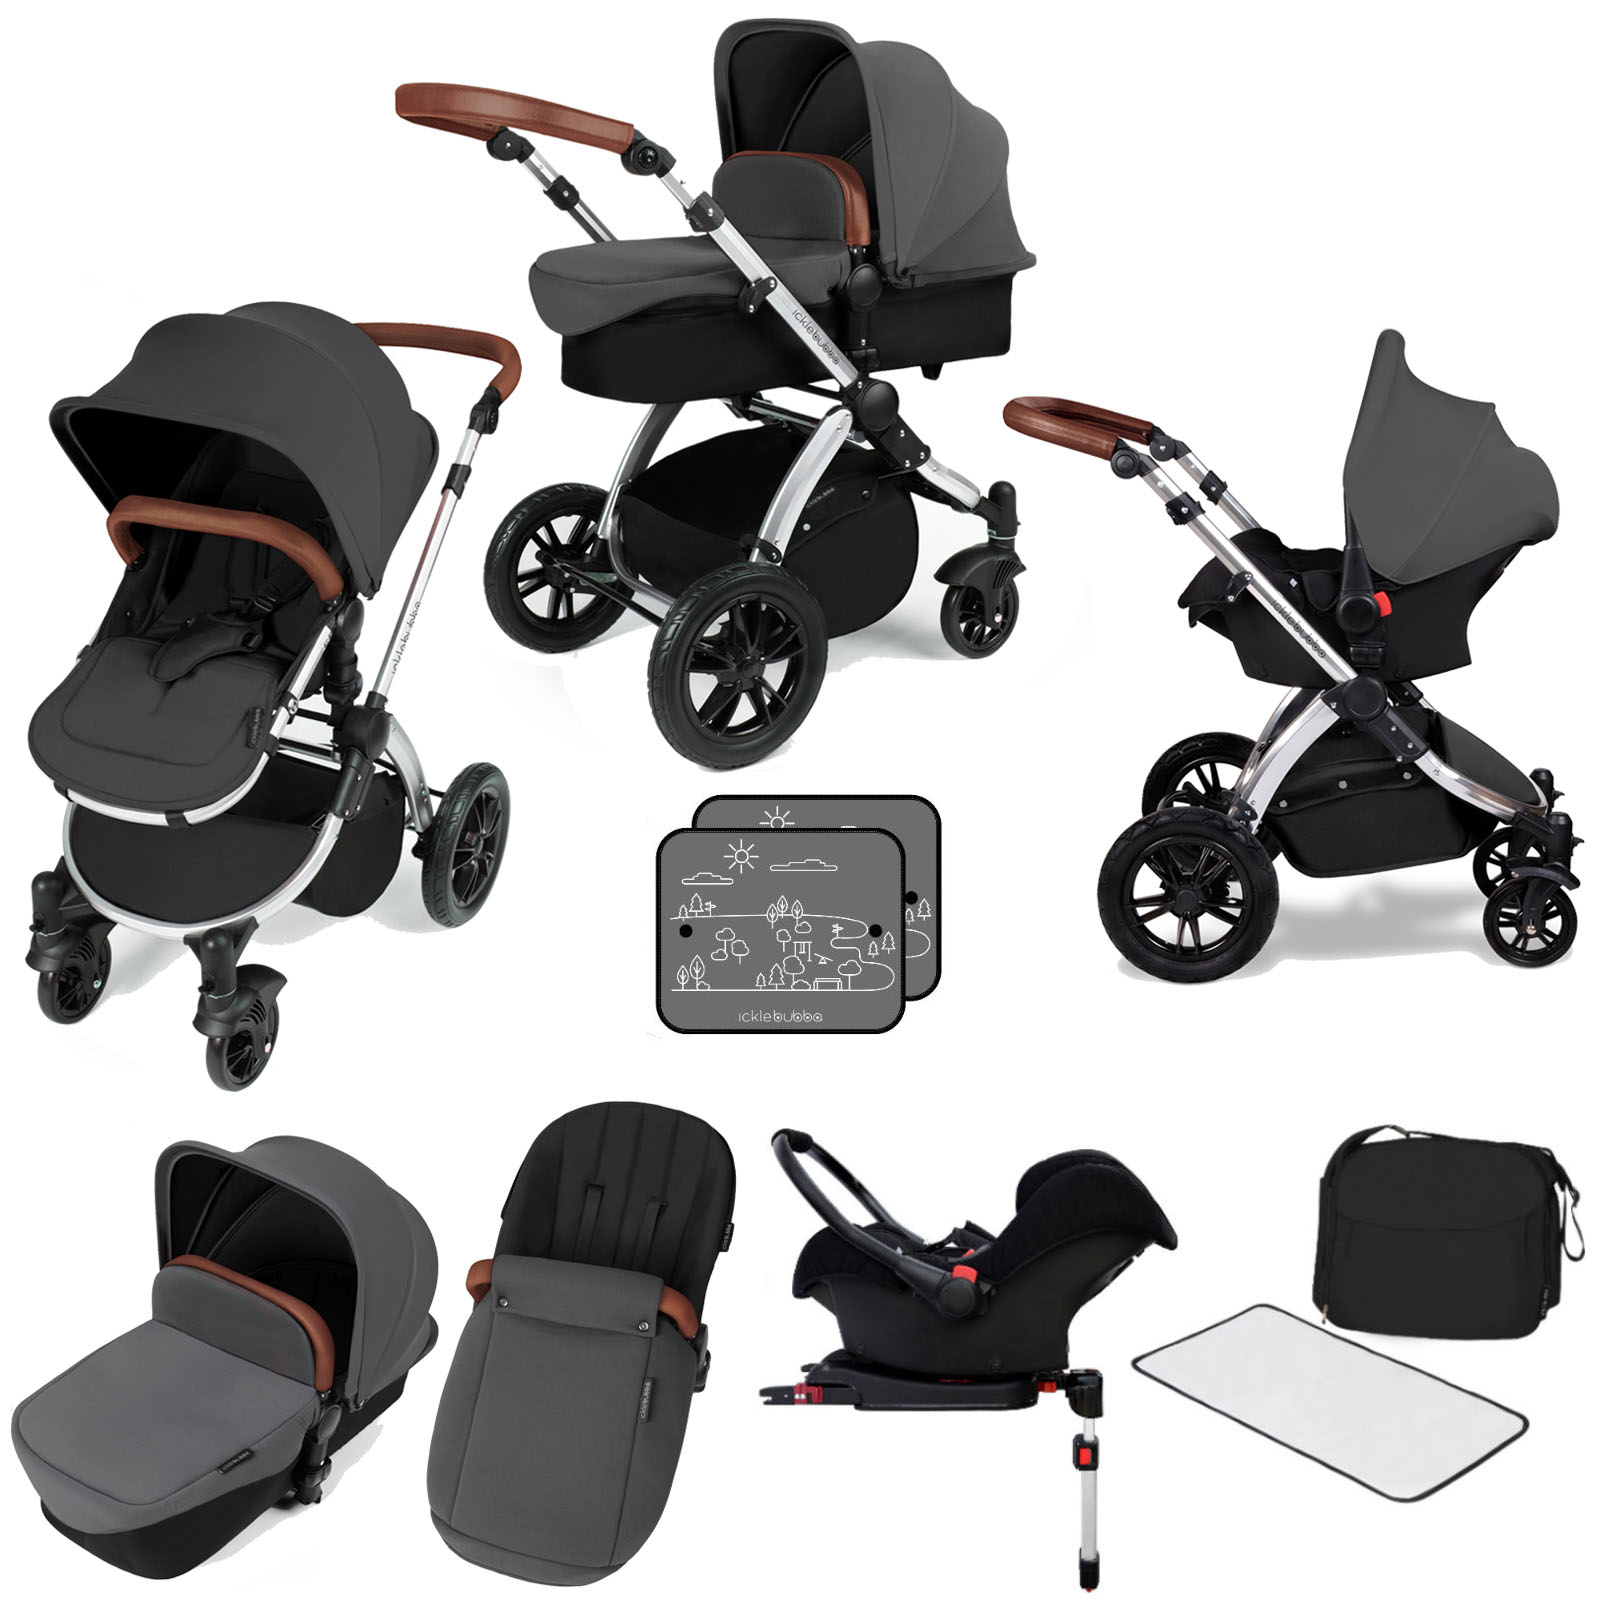 Ickle bubba Stomp V3 Silver All In One Travel System & ISOFIX Base - Graphite Grey...